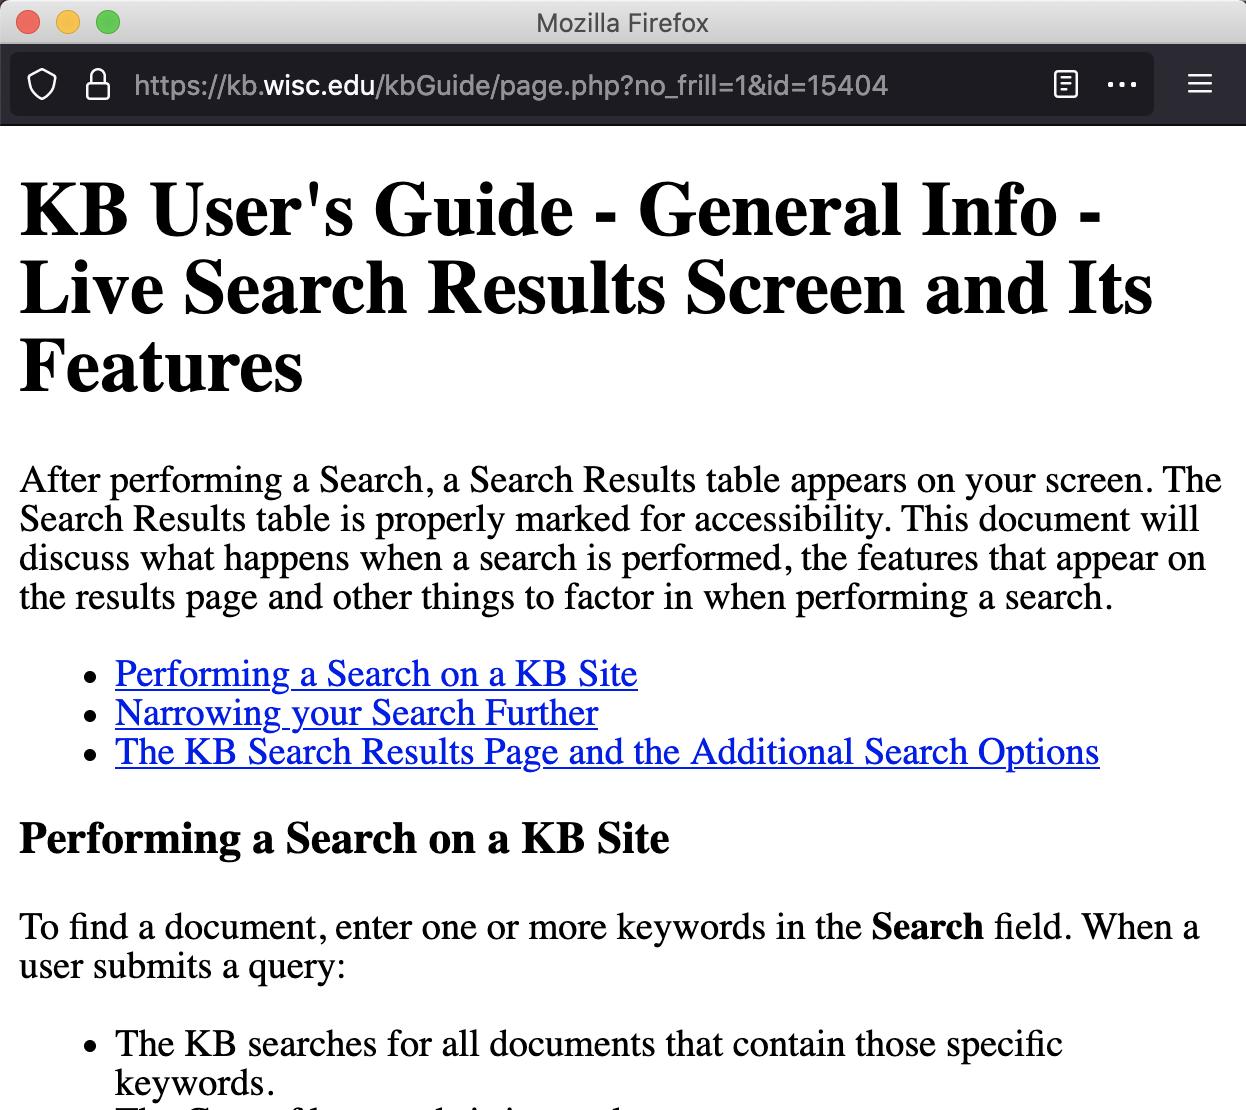 Search tip popup window displaying a document outlining search tips for the KB User's Guide